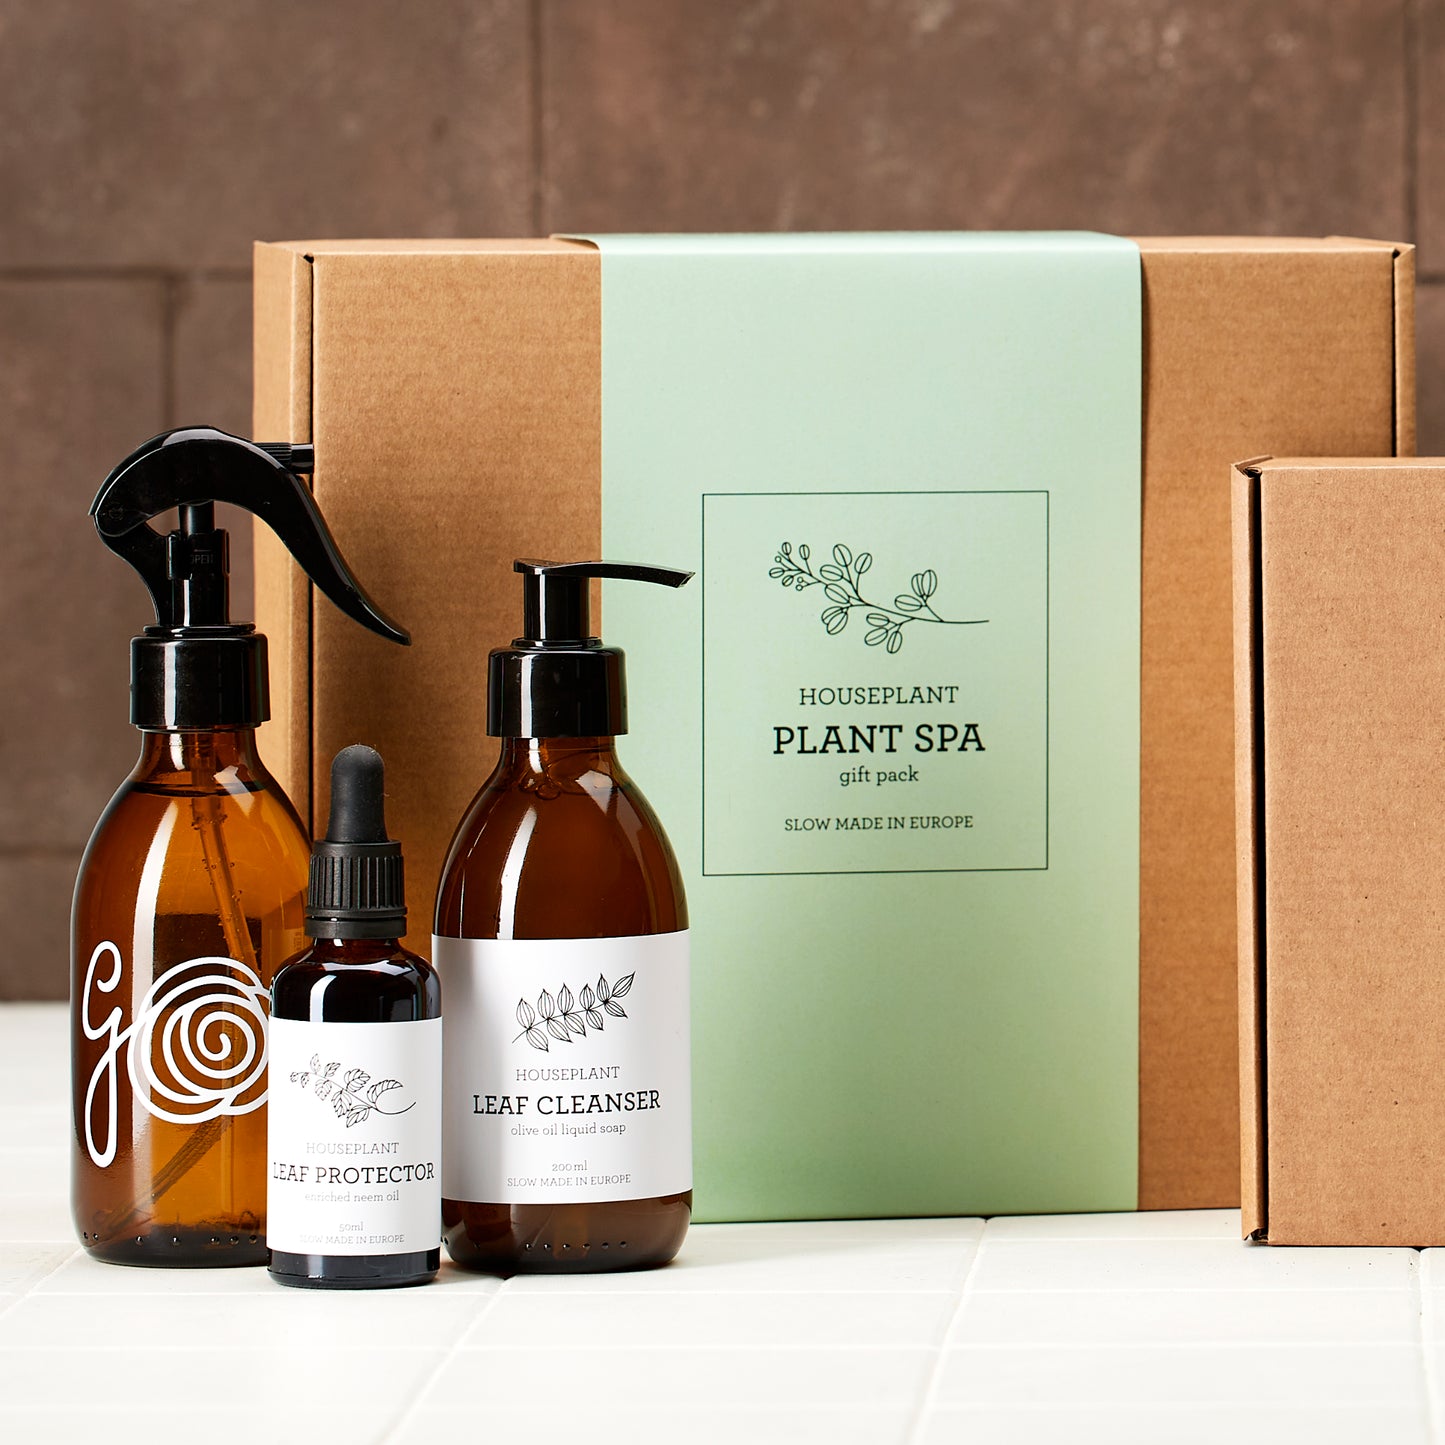 HOUSE PLANT SPA | Gift pack (Case of 4 units)